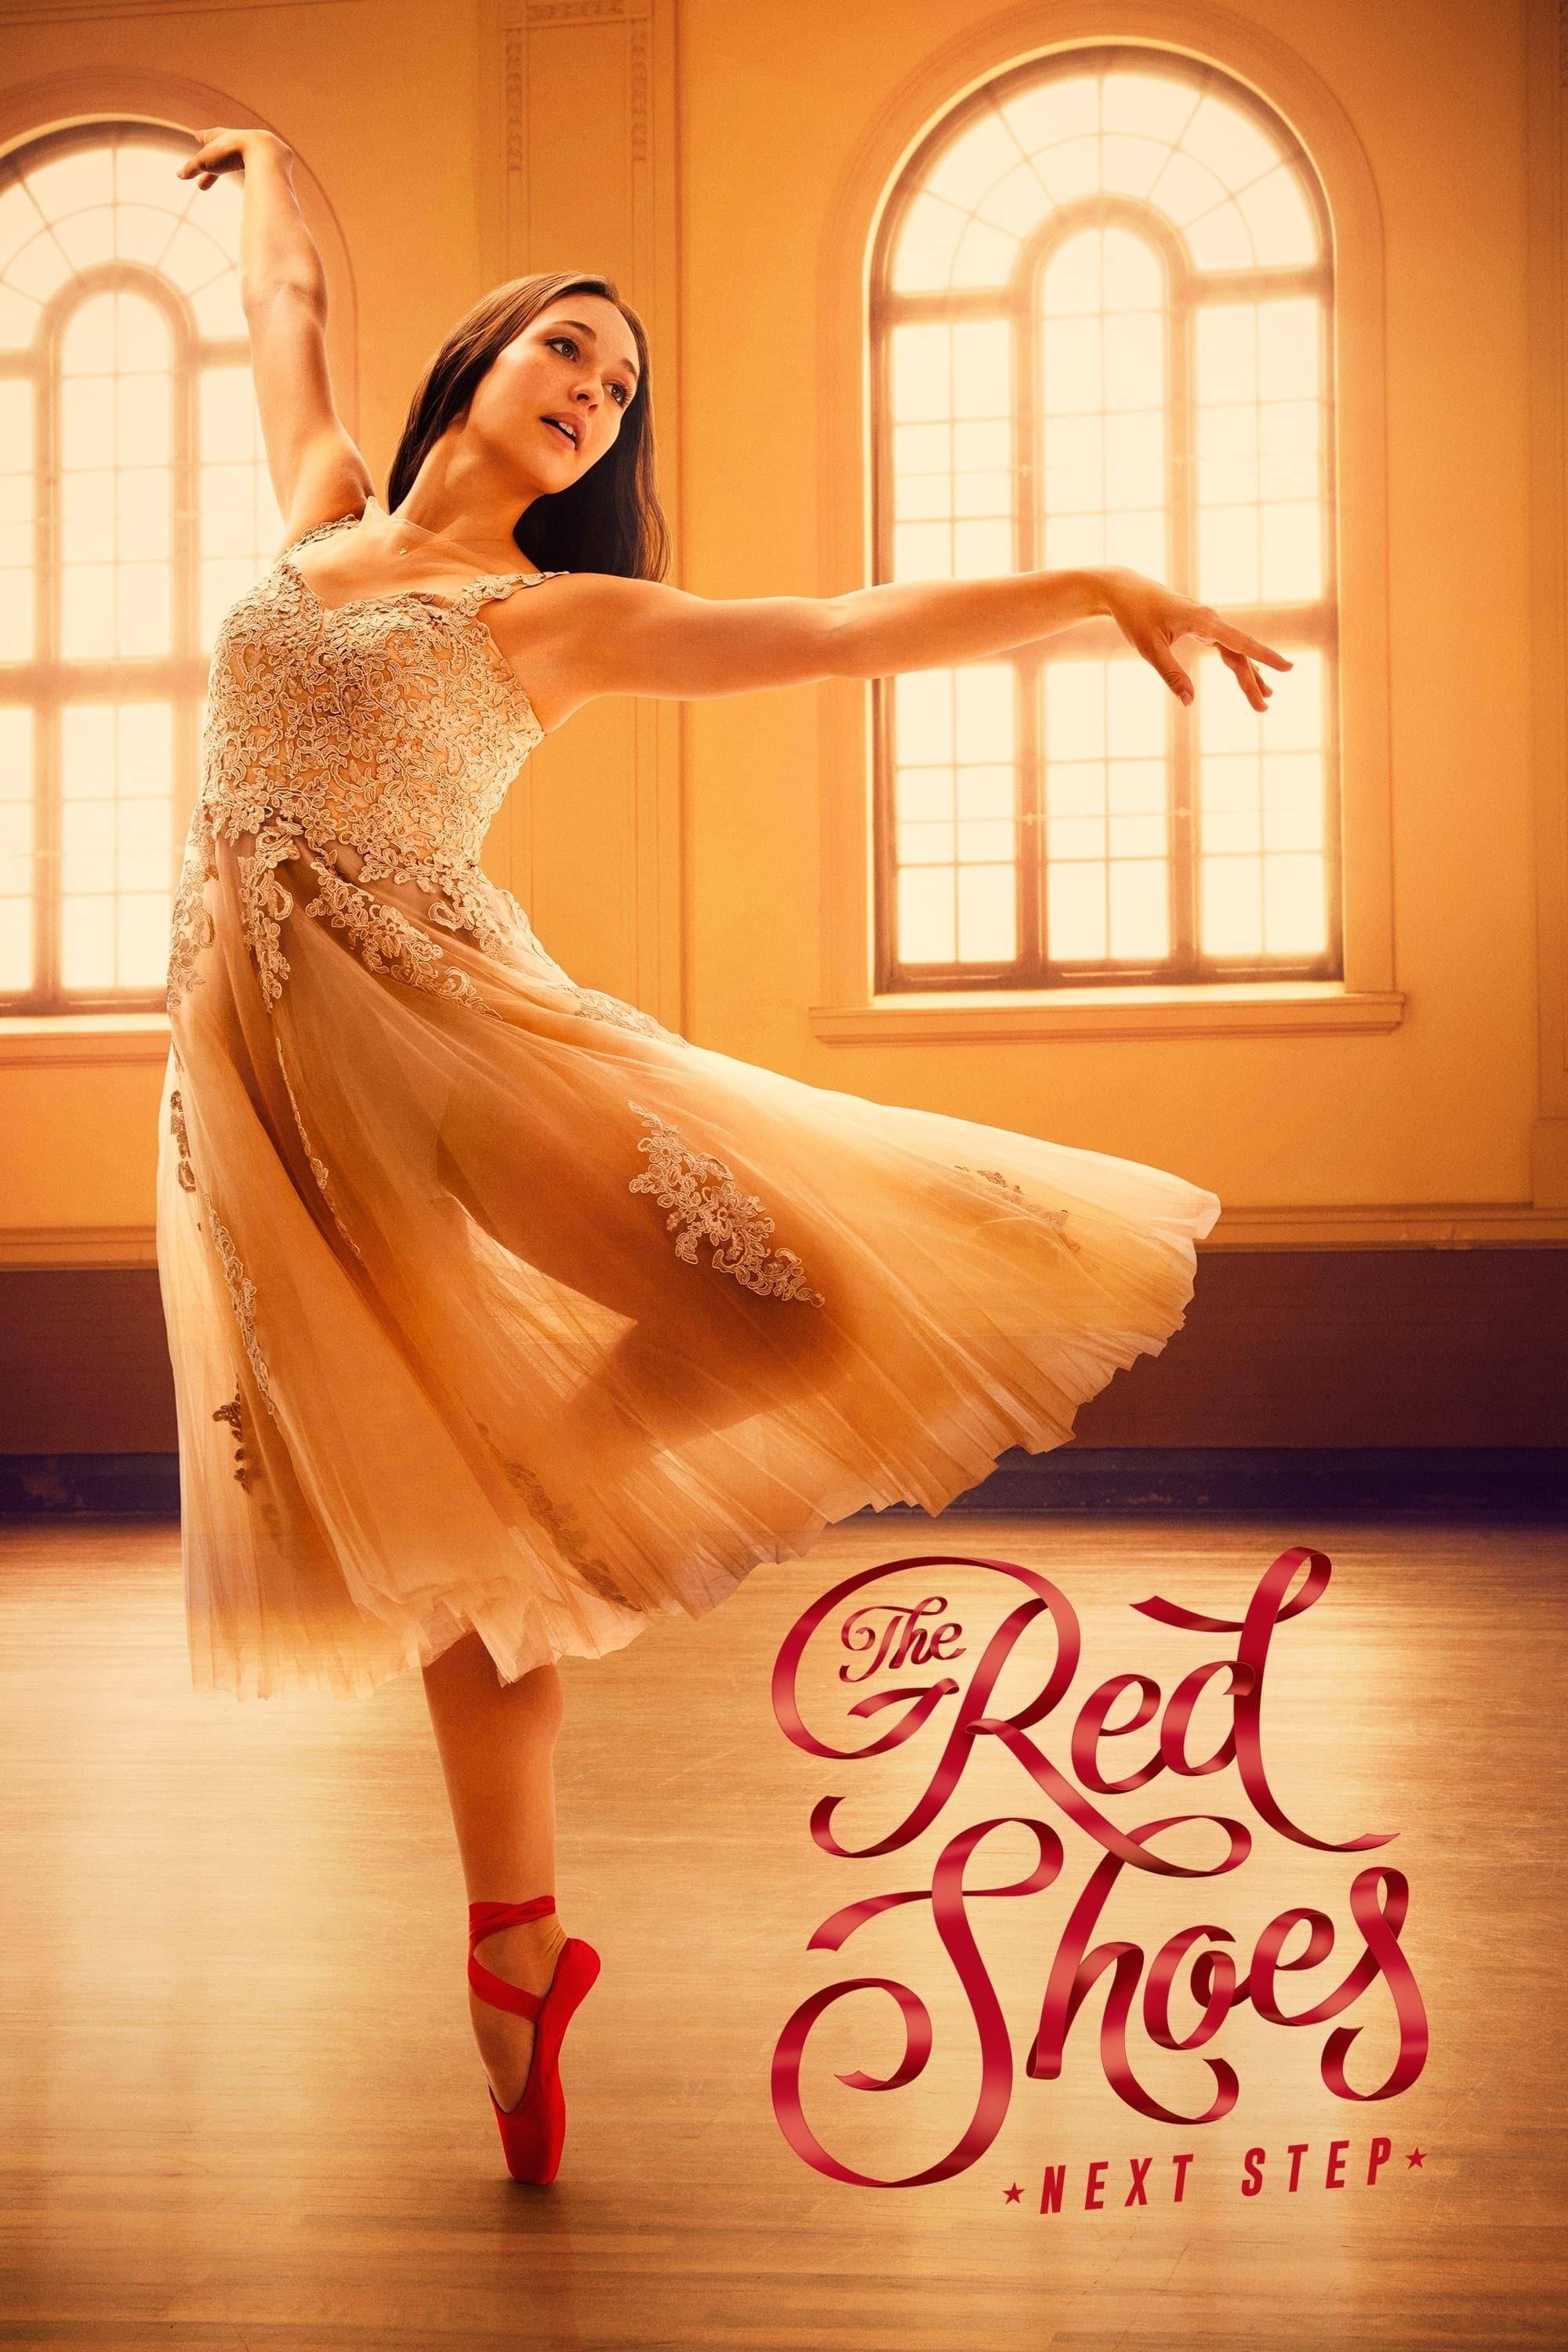 The Red Shoes: Next Step poster